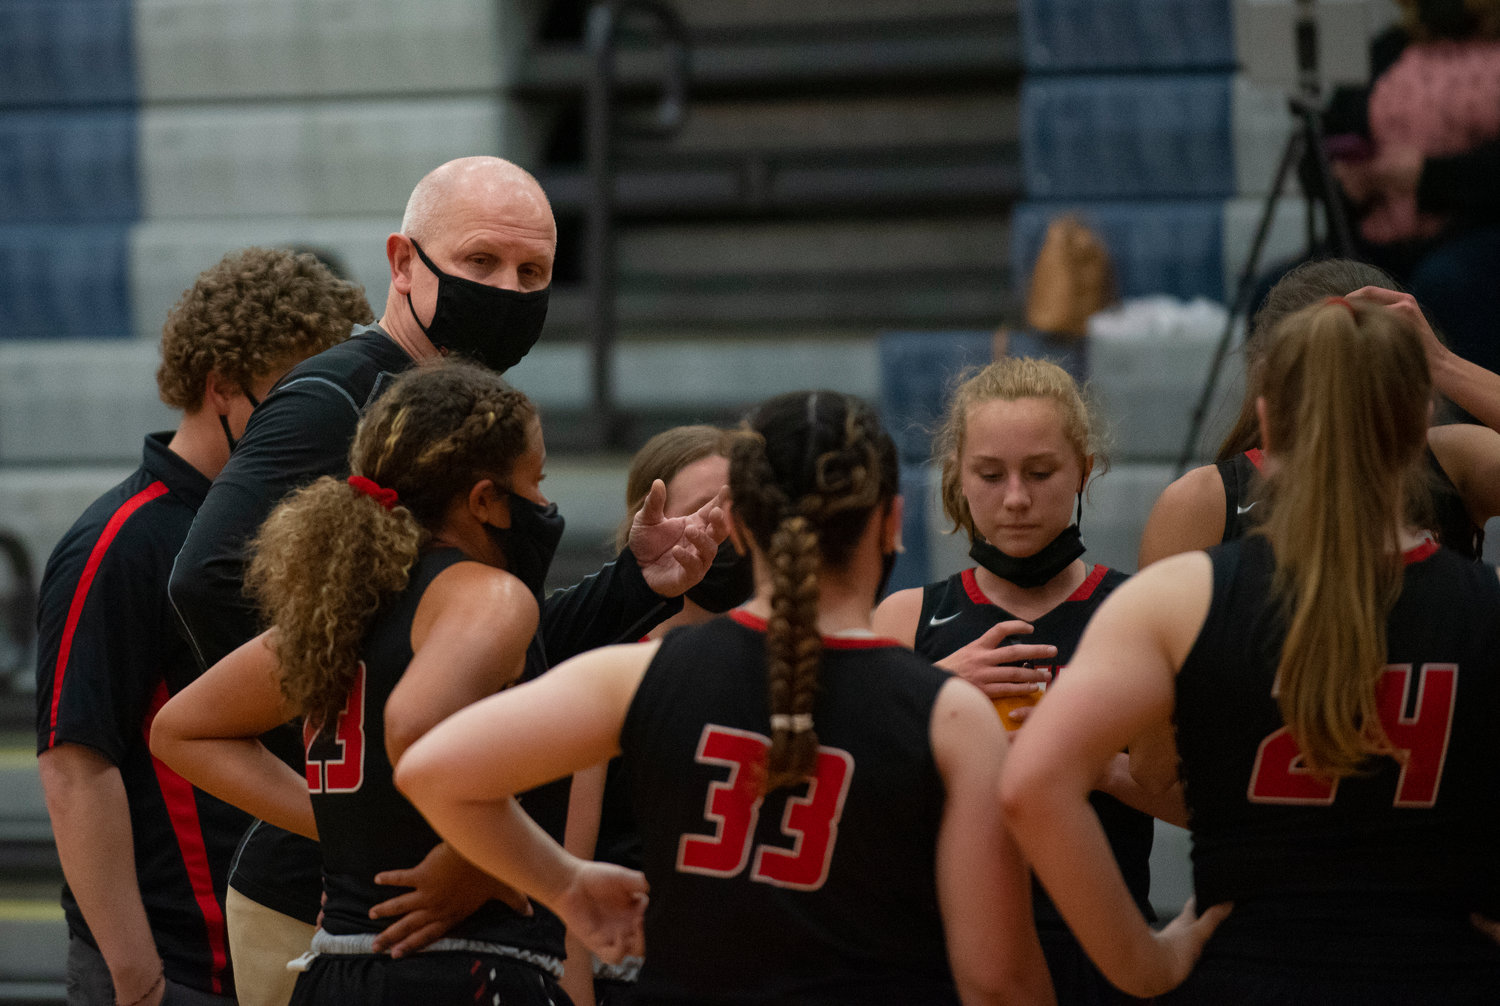 Tenino coach Scott Ashmore talks to his team during a 60-second timeout in a game against Rainier on Monday.